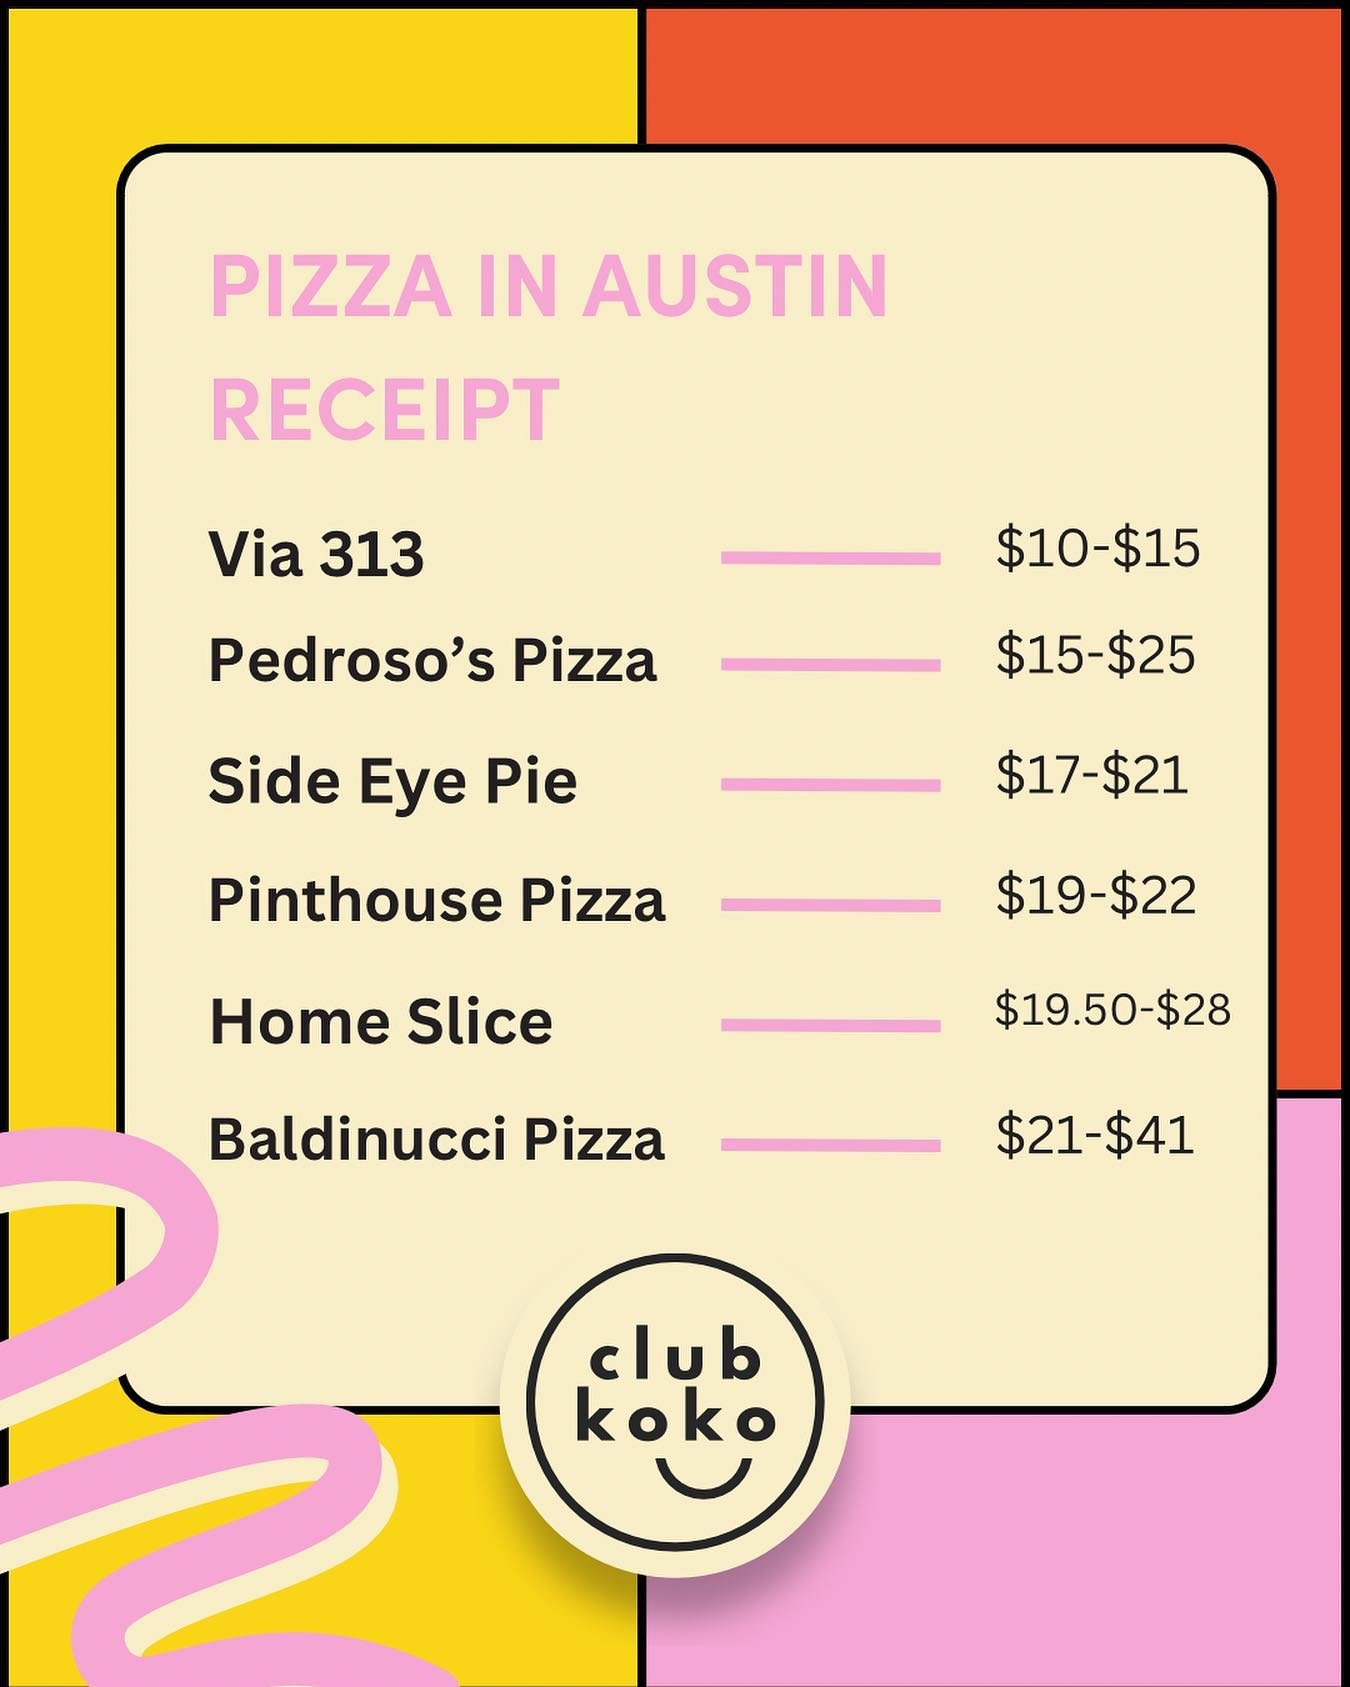 Let&rsquo;s talk about pizza prices in Austin, TX! Comment below with your thoughts and your favorite pizza spots.

&mdash;

🤠 Join Club Koko, my insider guide to Austin with 📱weekly text recs,🍴organized databases with my notes &amp; ratings on re